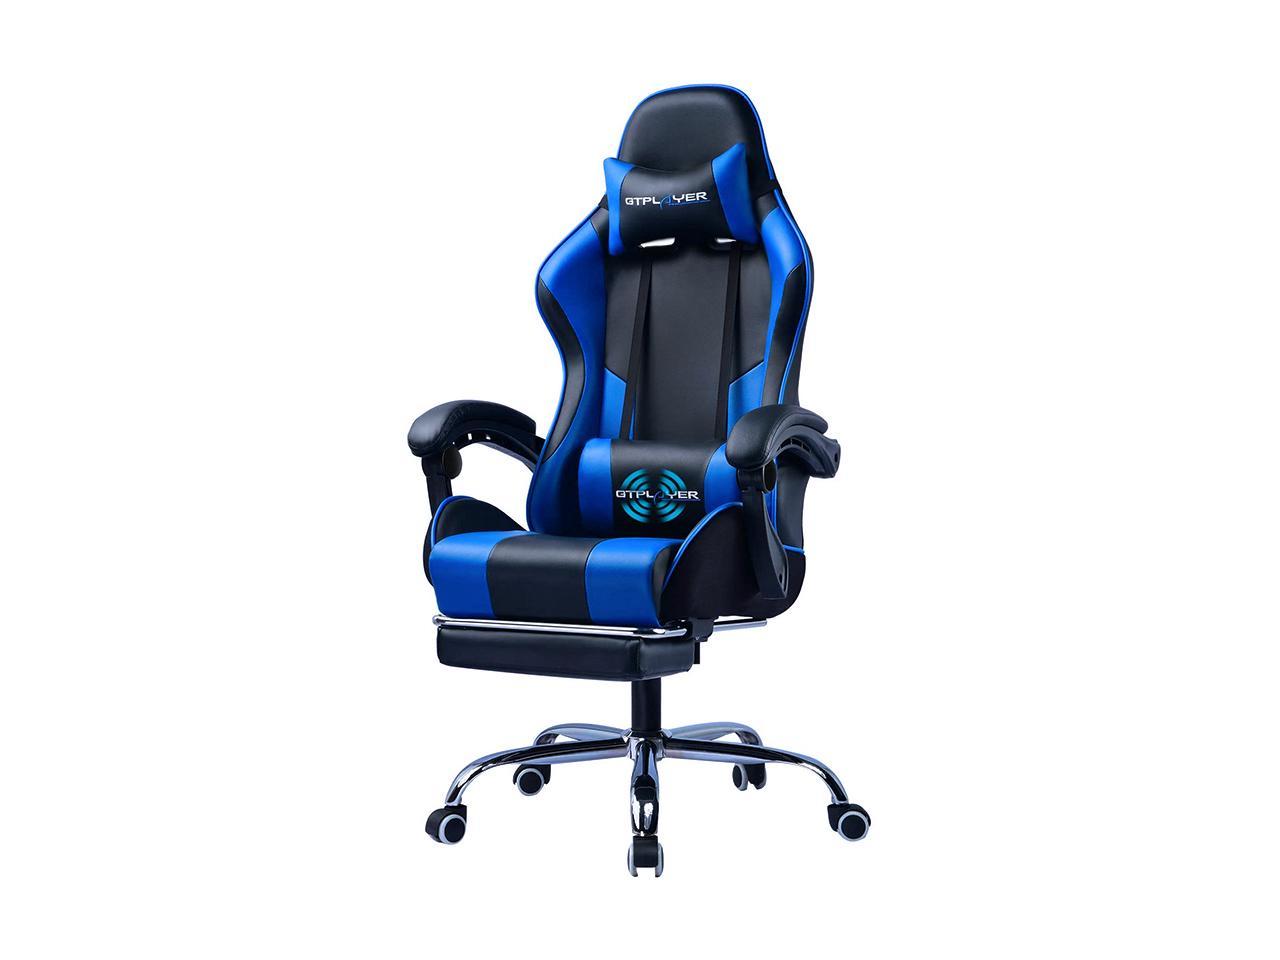 gtplayer gaming chair with footrest ergonomic massage office chair for adults adjustable swivel leather computer chair high back desk chair with headrest and massager lumbar support blue newegg com